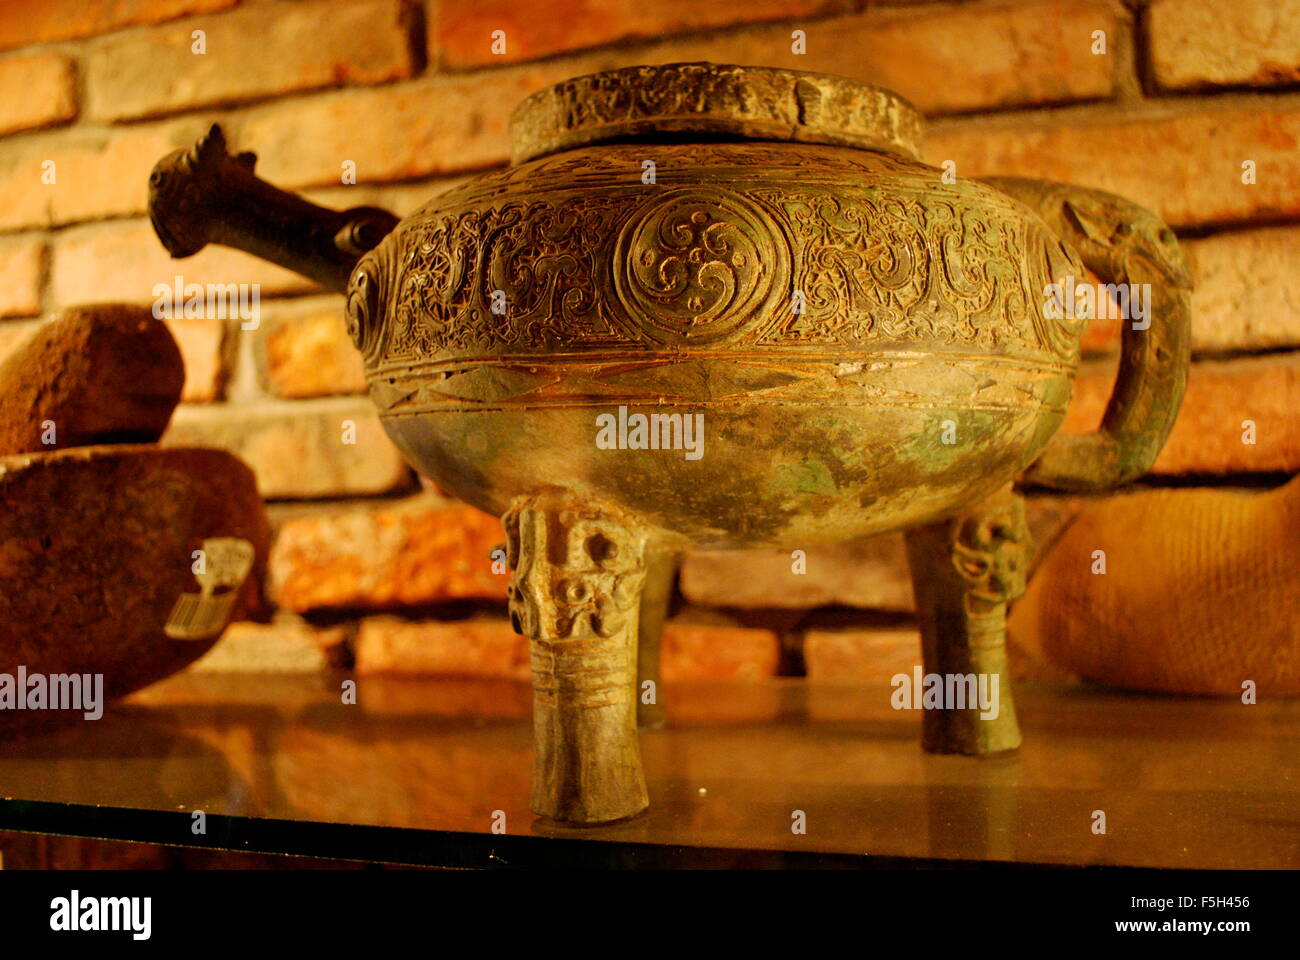 Clay pot at Museum of Traditional Vietnamese Medicine, Ho Chi Minh City, Vietnam, Asia Stock Photo